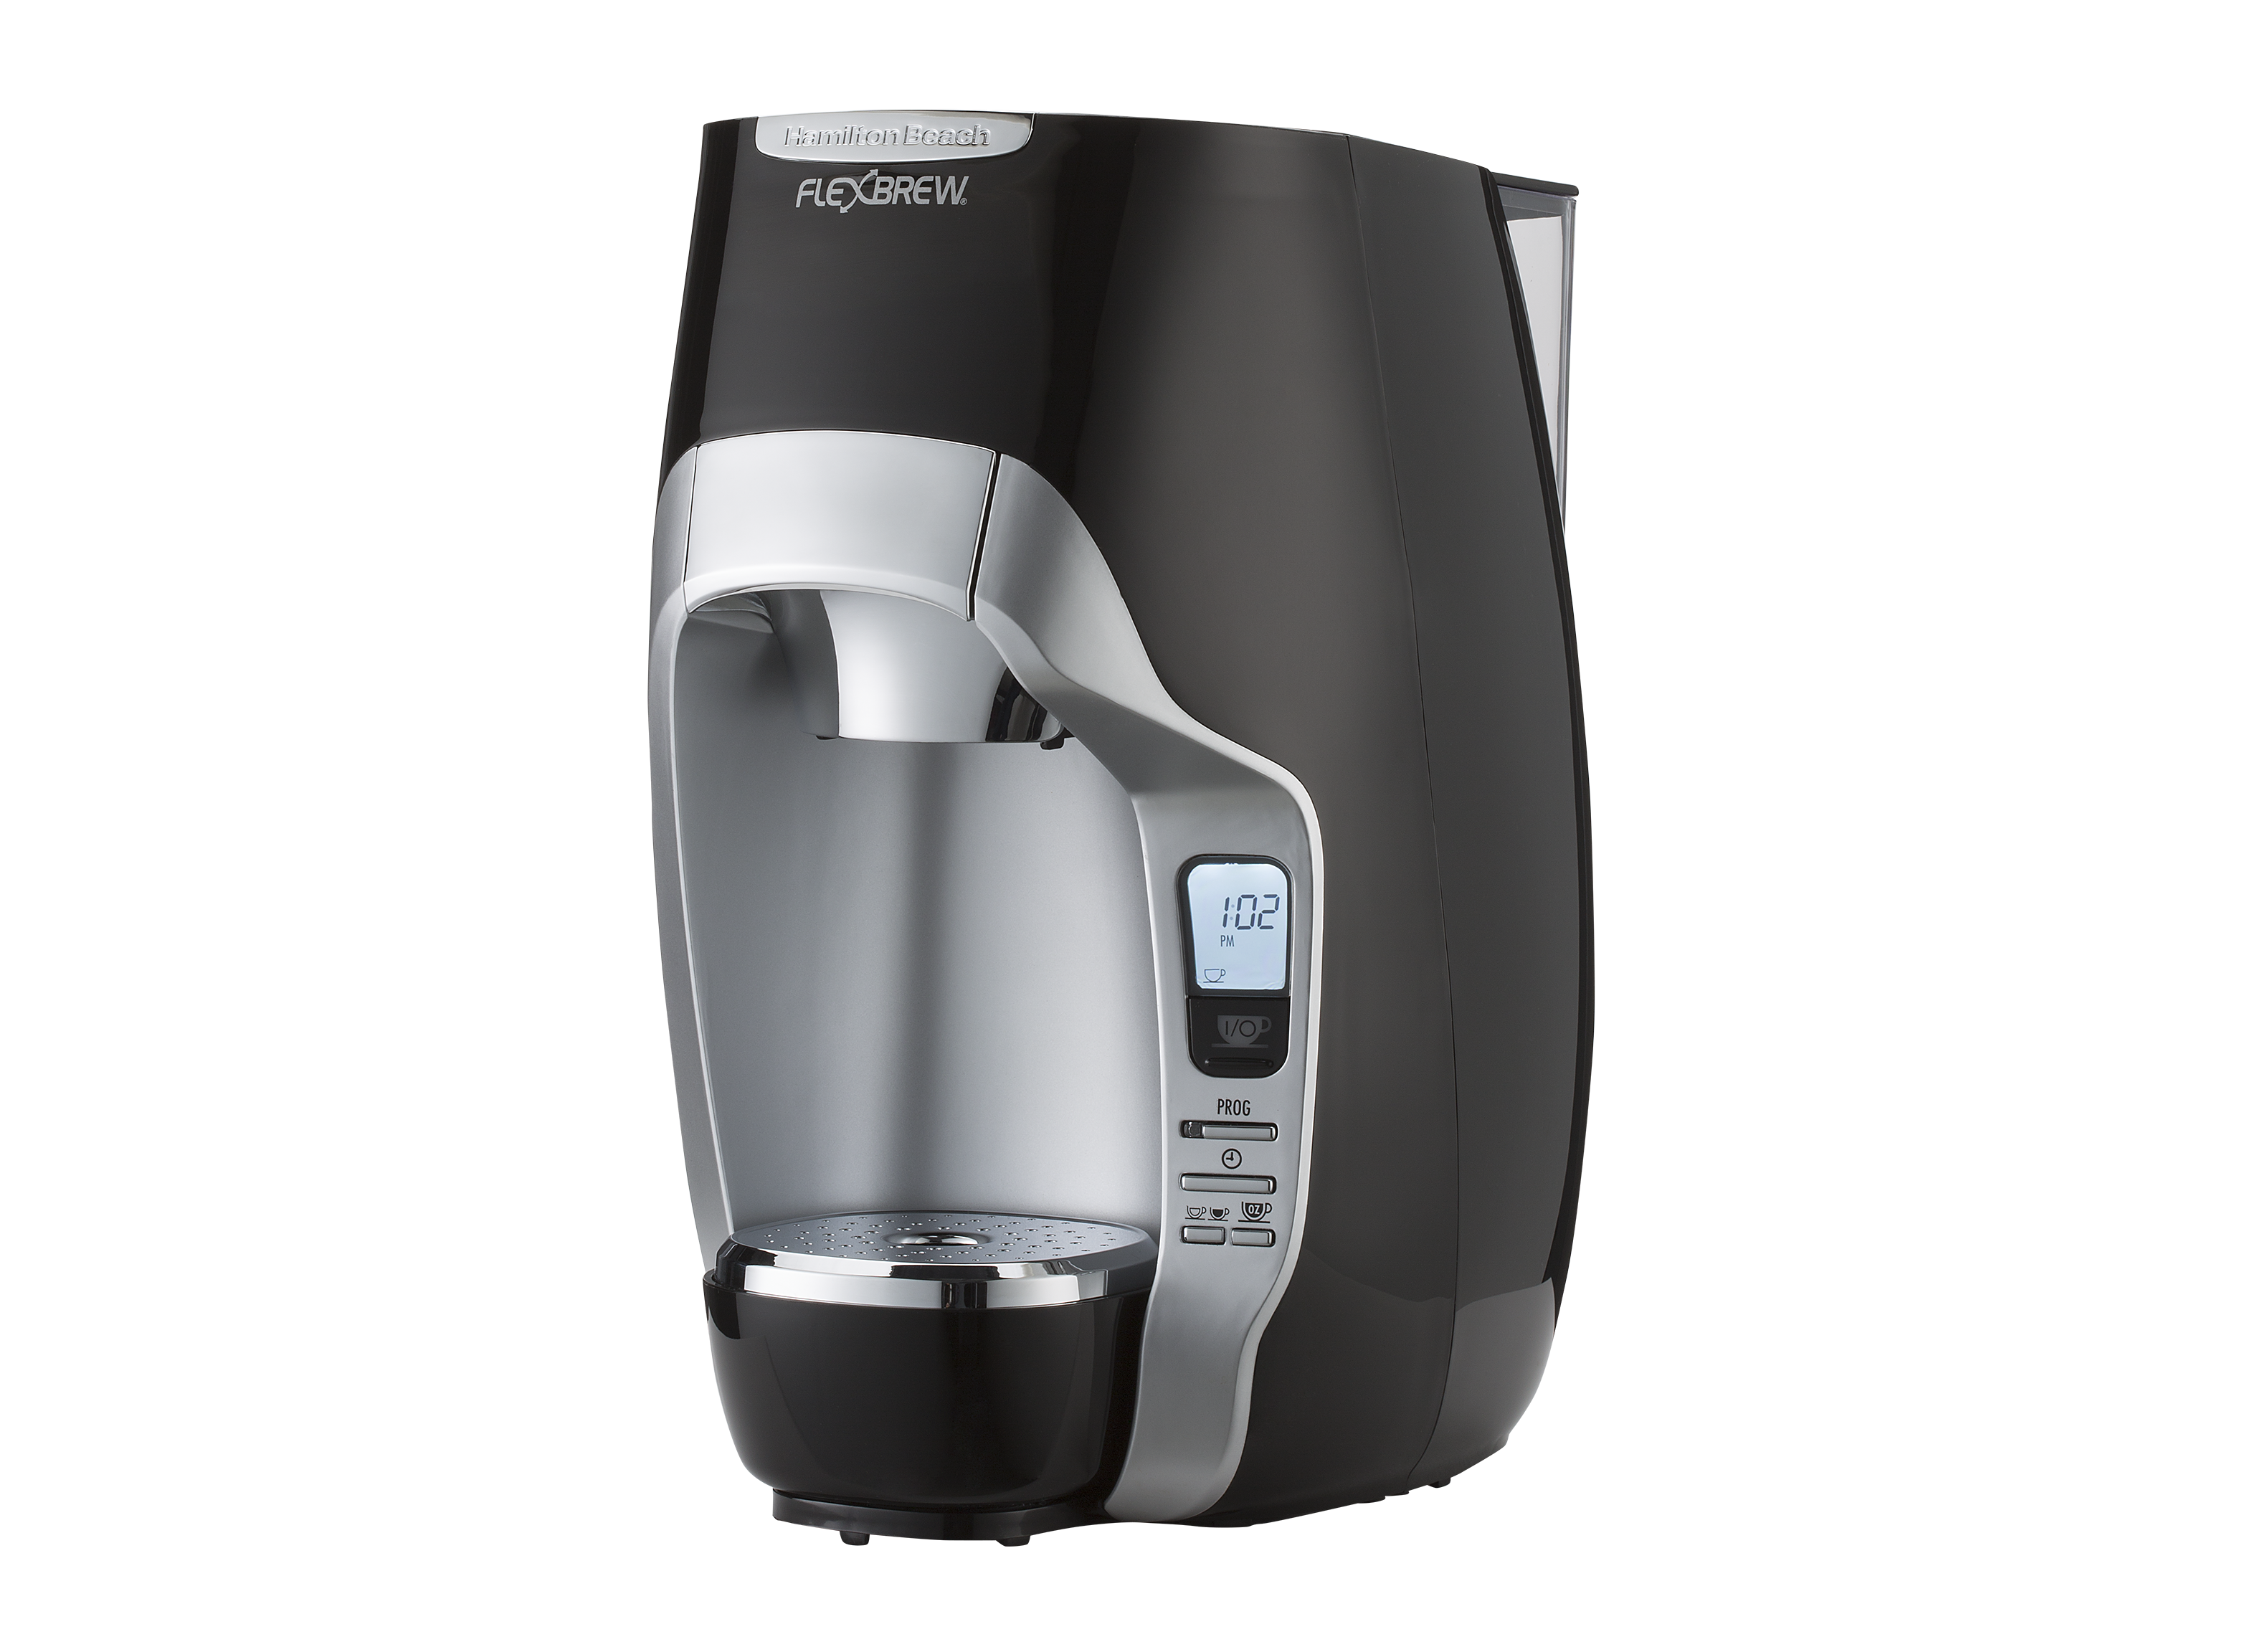 https://crdms.images.consumerreports.org/prod/products/cr/models/291732-coffeemakers-hamiltonbeach-flexbrewsingleservewithremovablereservior49996.png